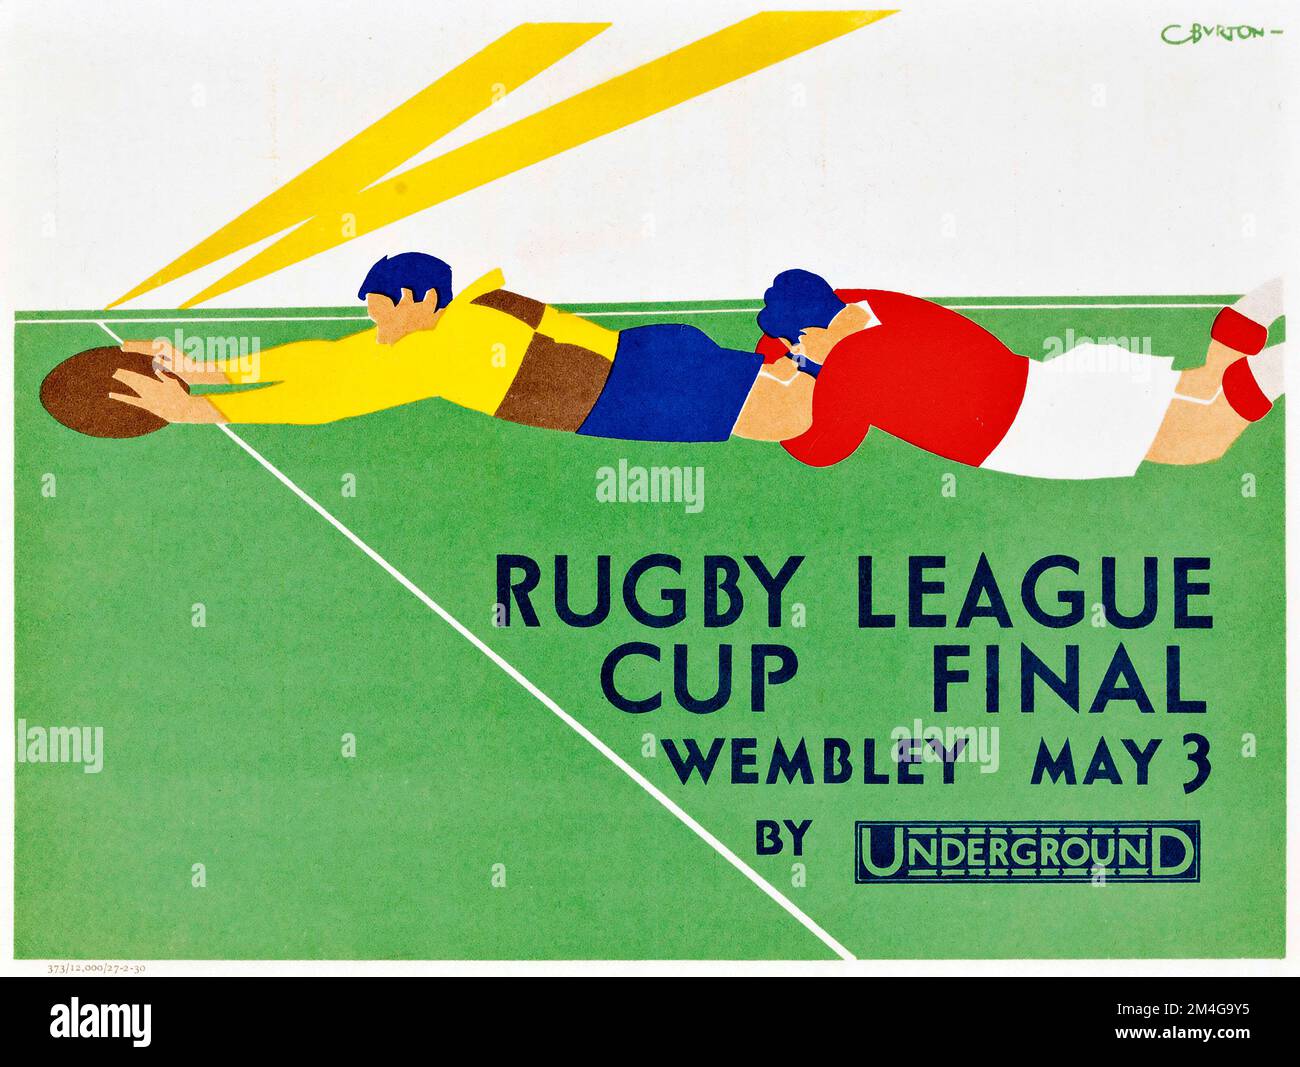 London Underground poster - Charles Burton artwork - RUGBY LEAGUE CUP FINAL 1930 Stock Photo